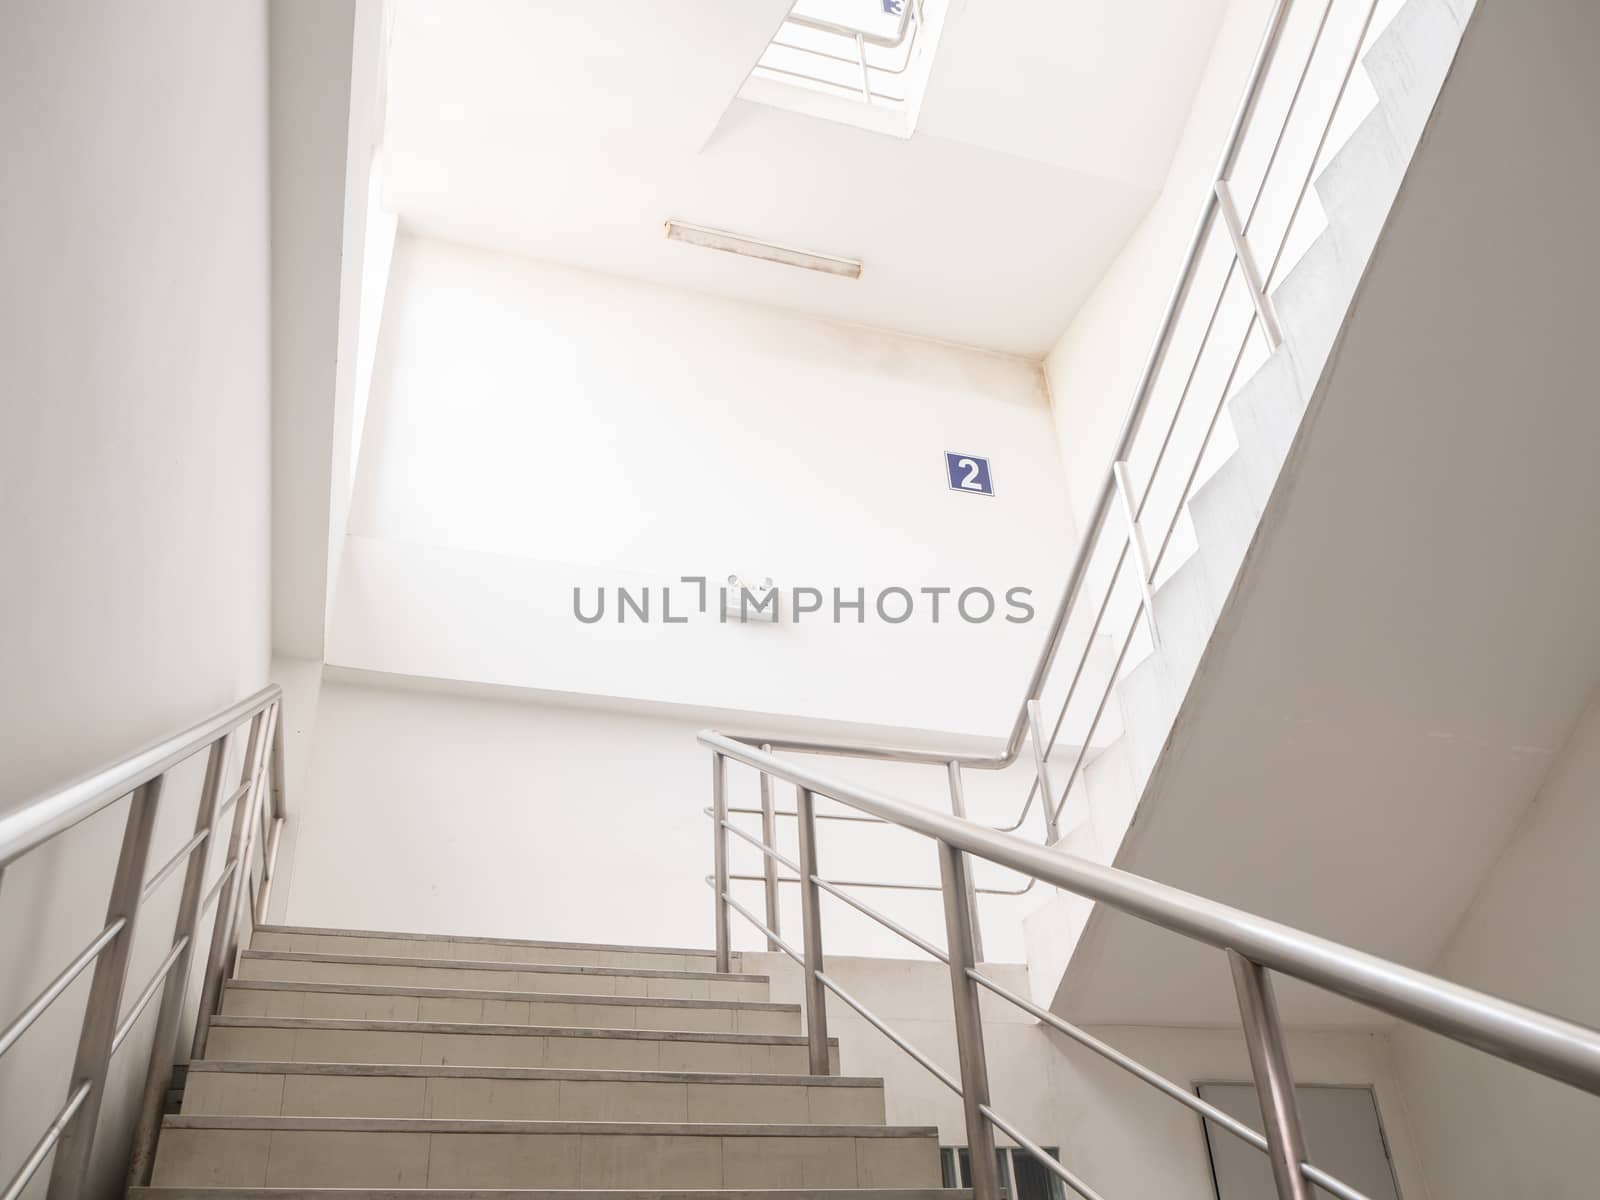 emergency exit ,   Staircase in modern modern building